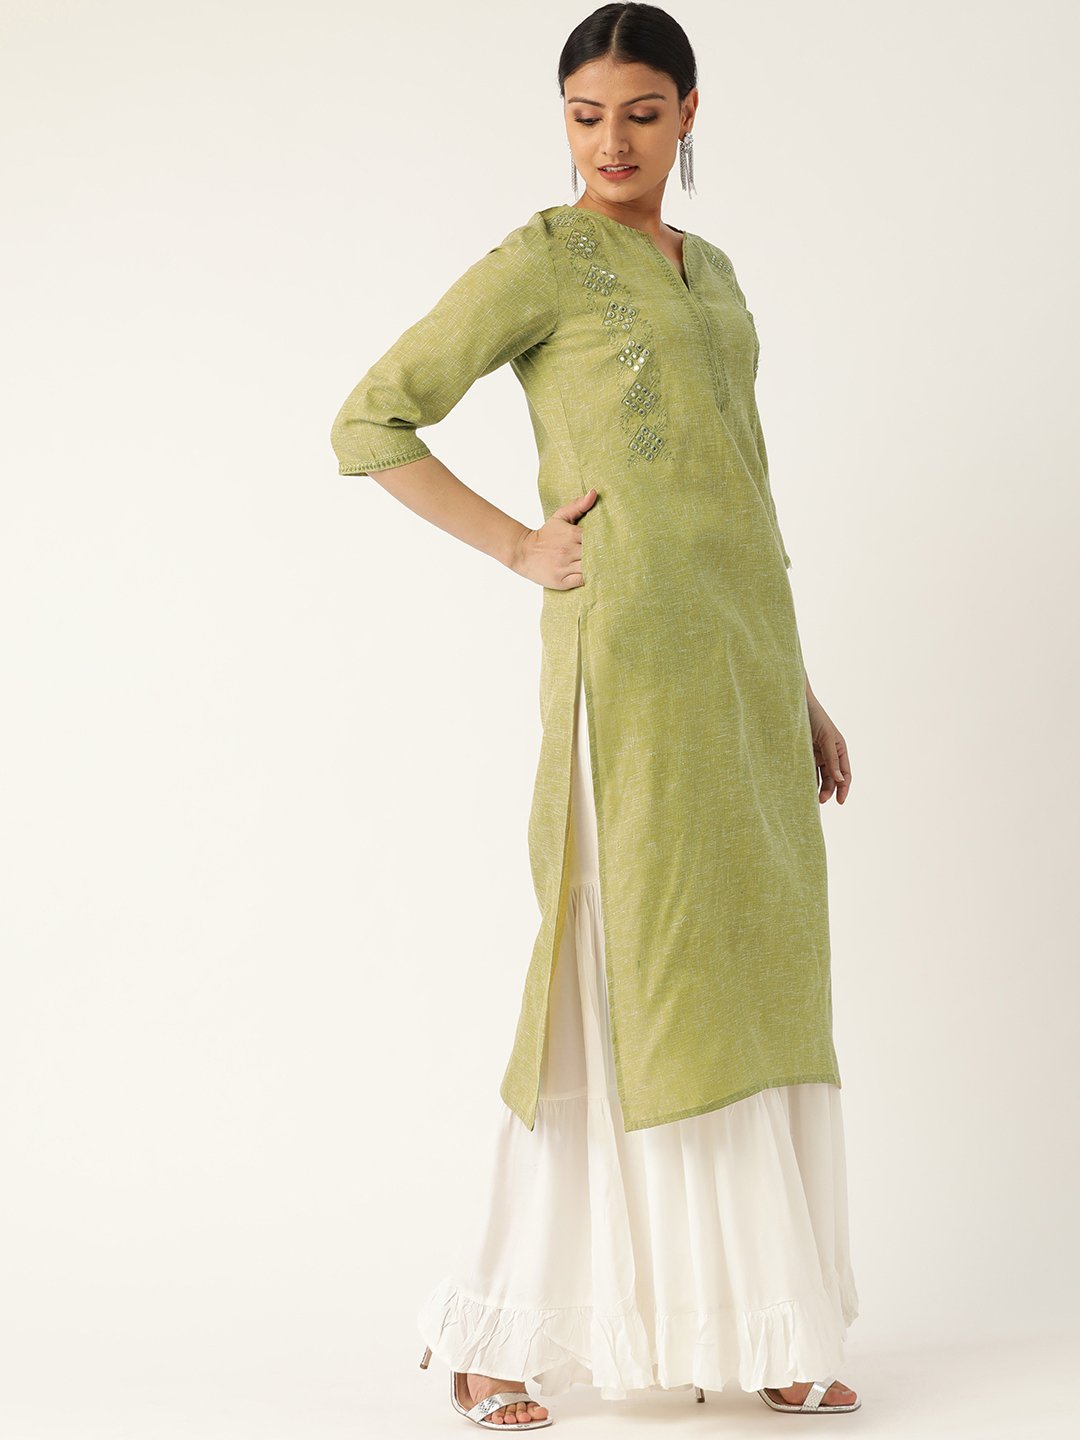 Women's Green Calf Length Three-Quarter Sleeves Straight Solid Embroidered Cotton Kurta - Nayo Clothing